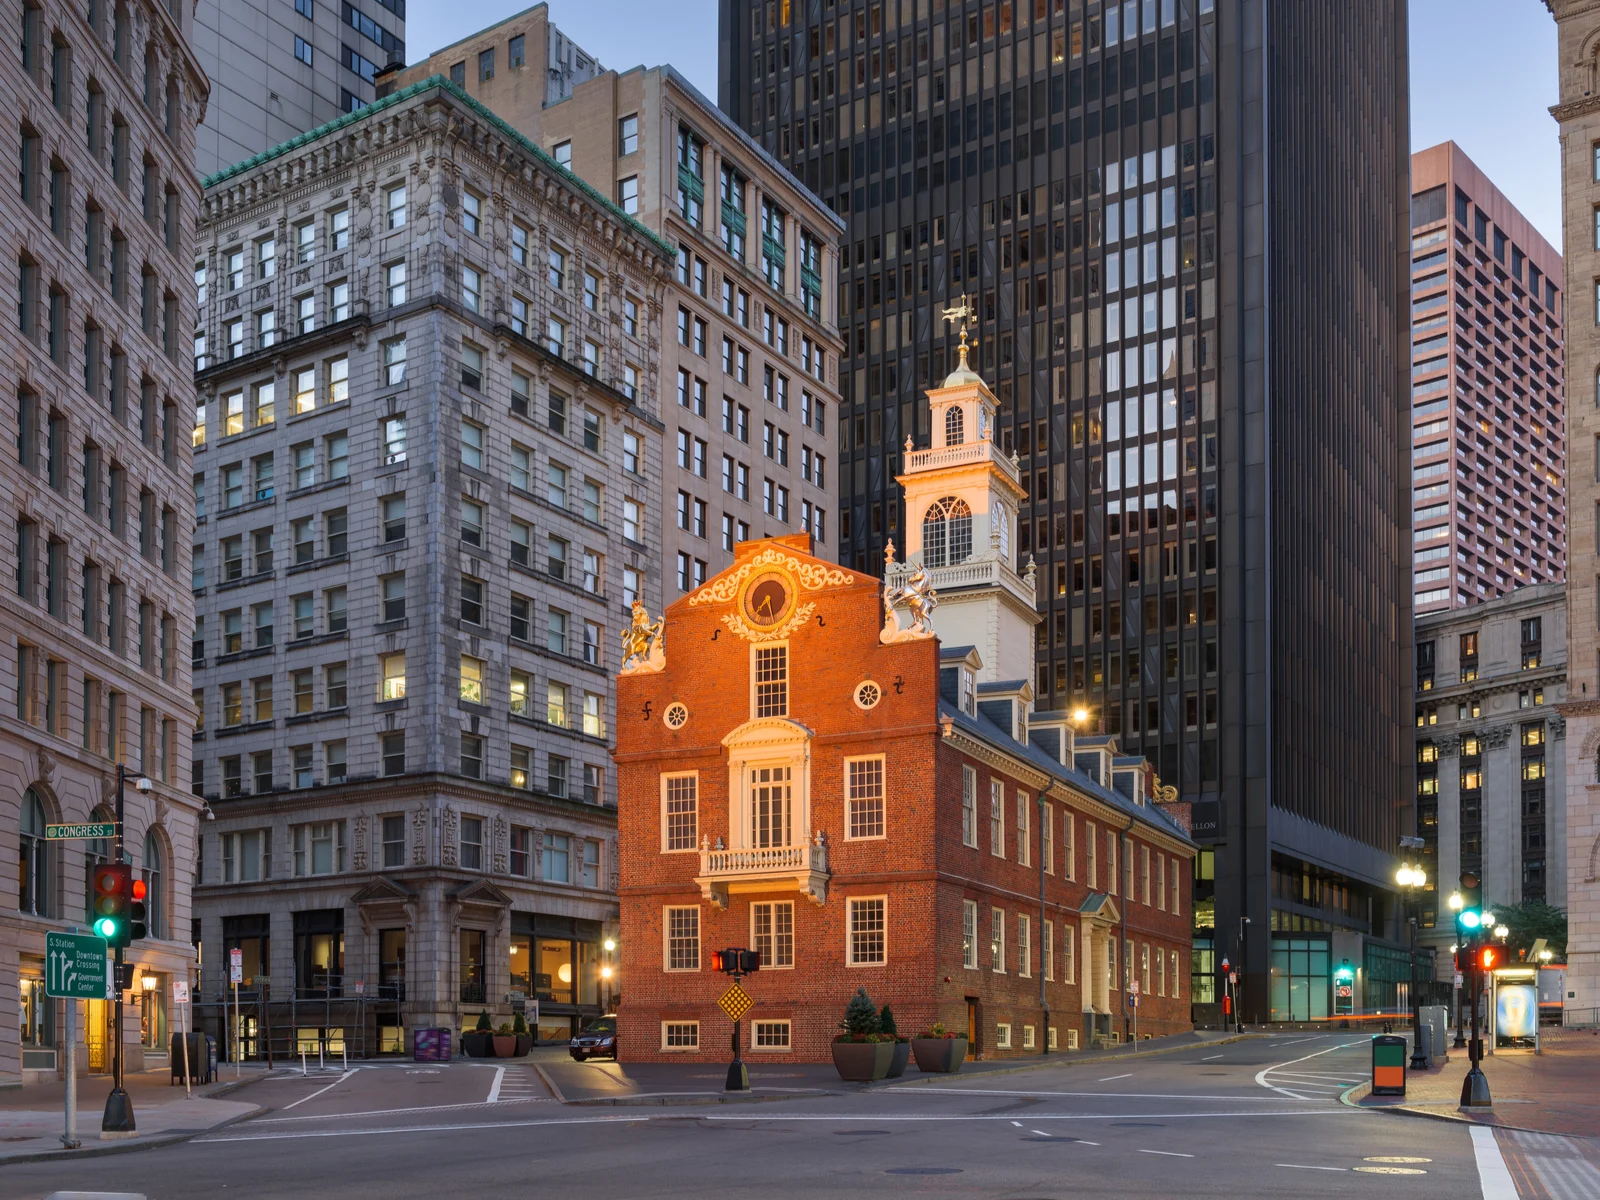 For a pick on where to stay in Boston, the Old State House is pictured below skyscrapers